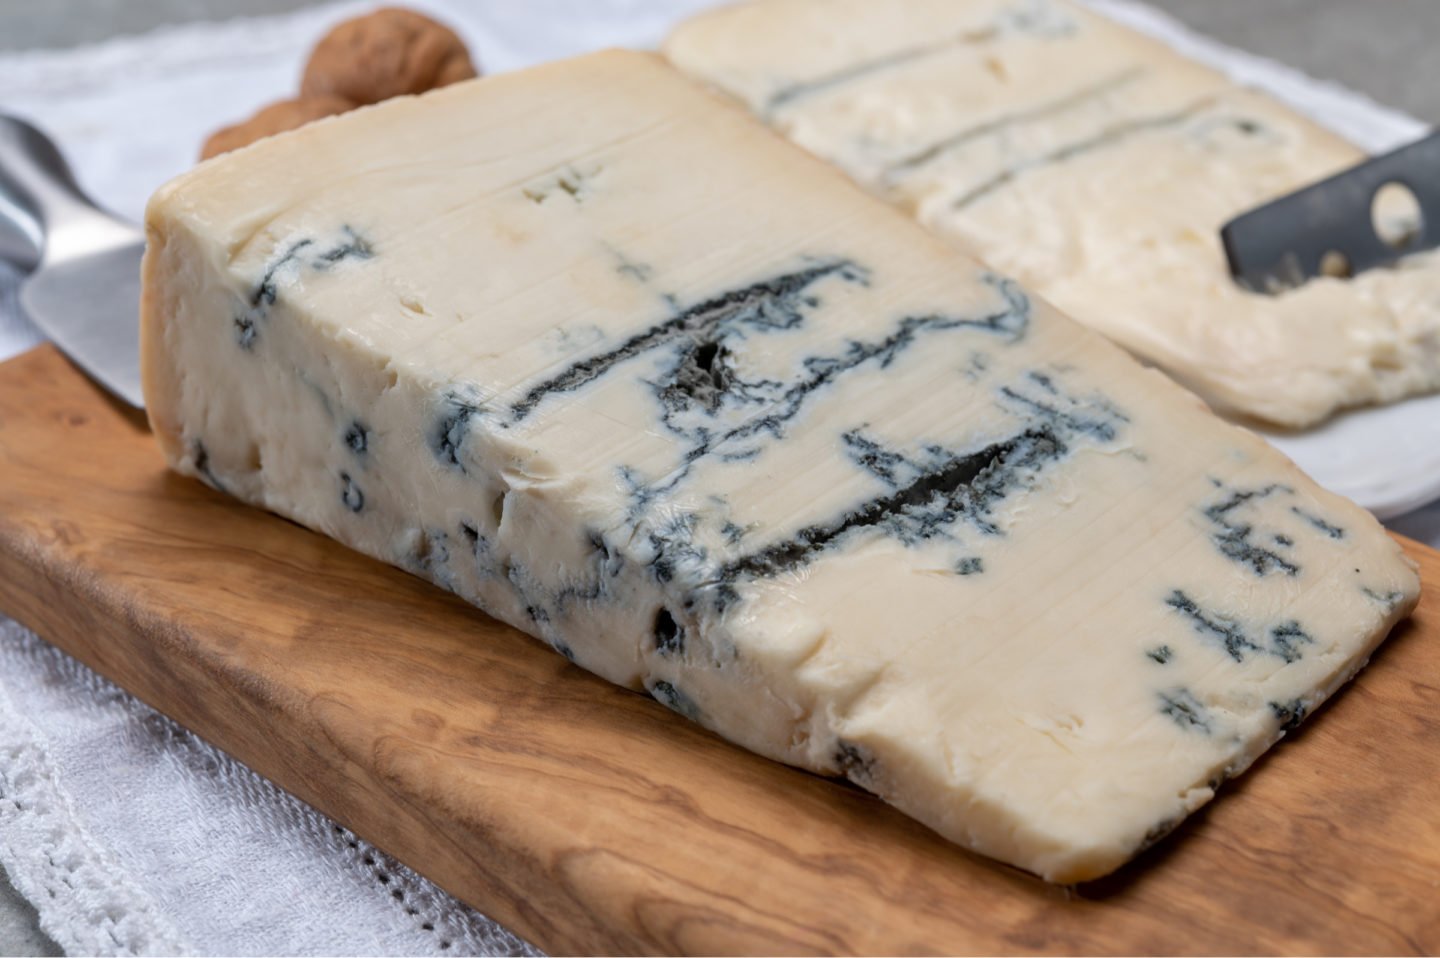 a slice of authentic Gorgonzola cheese